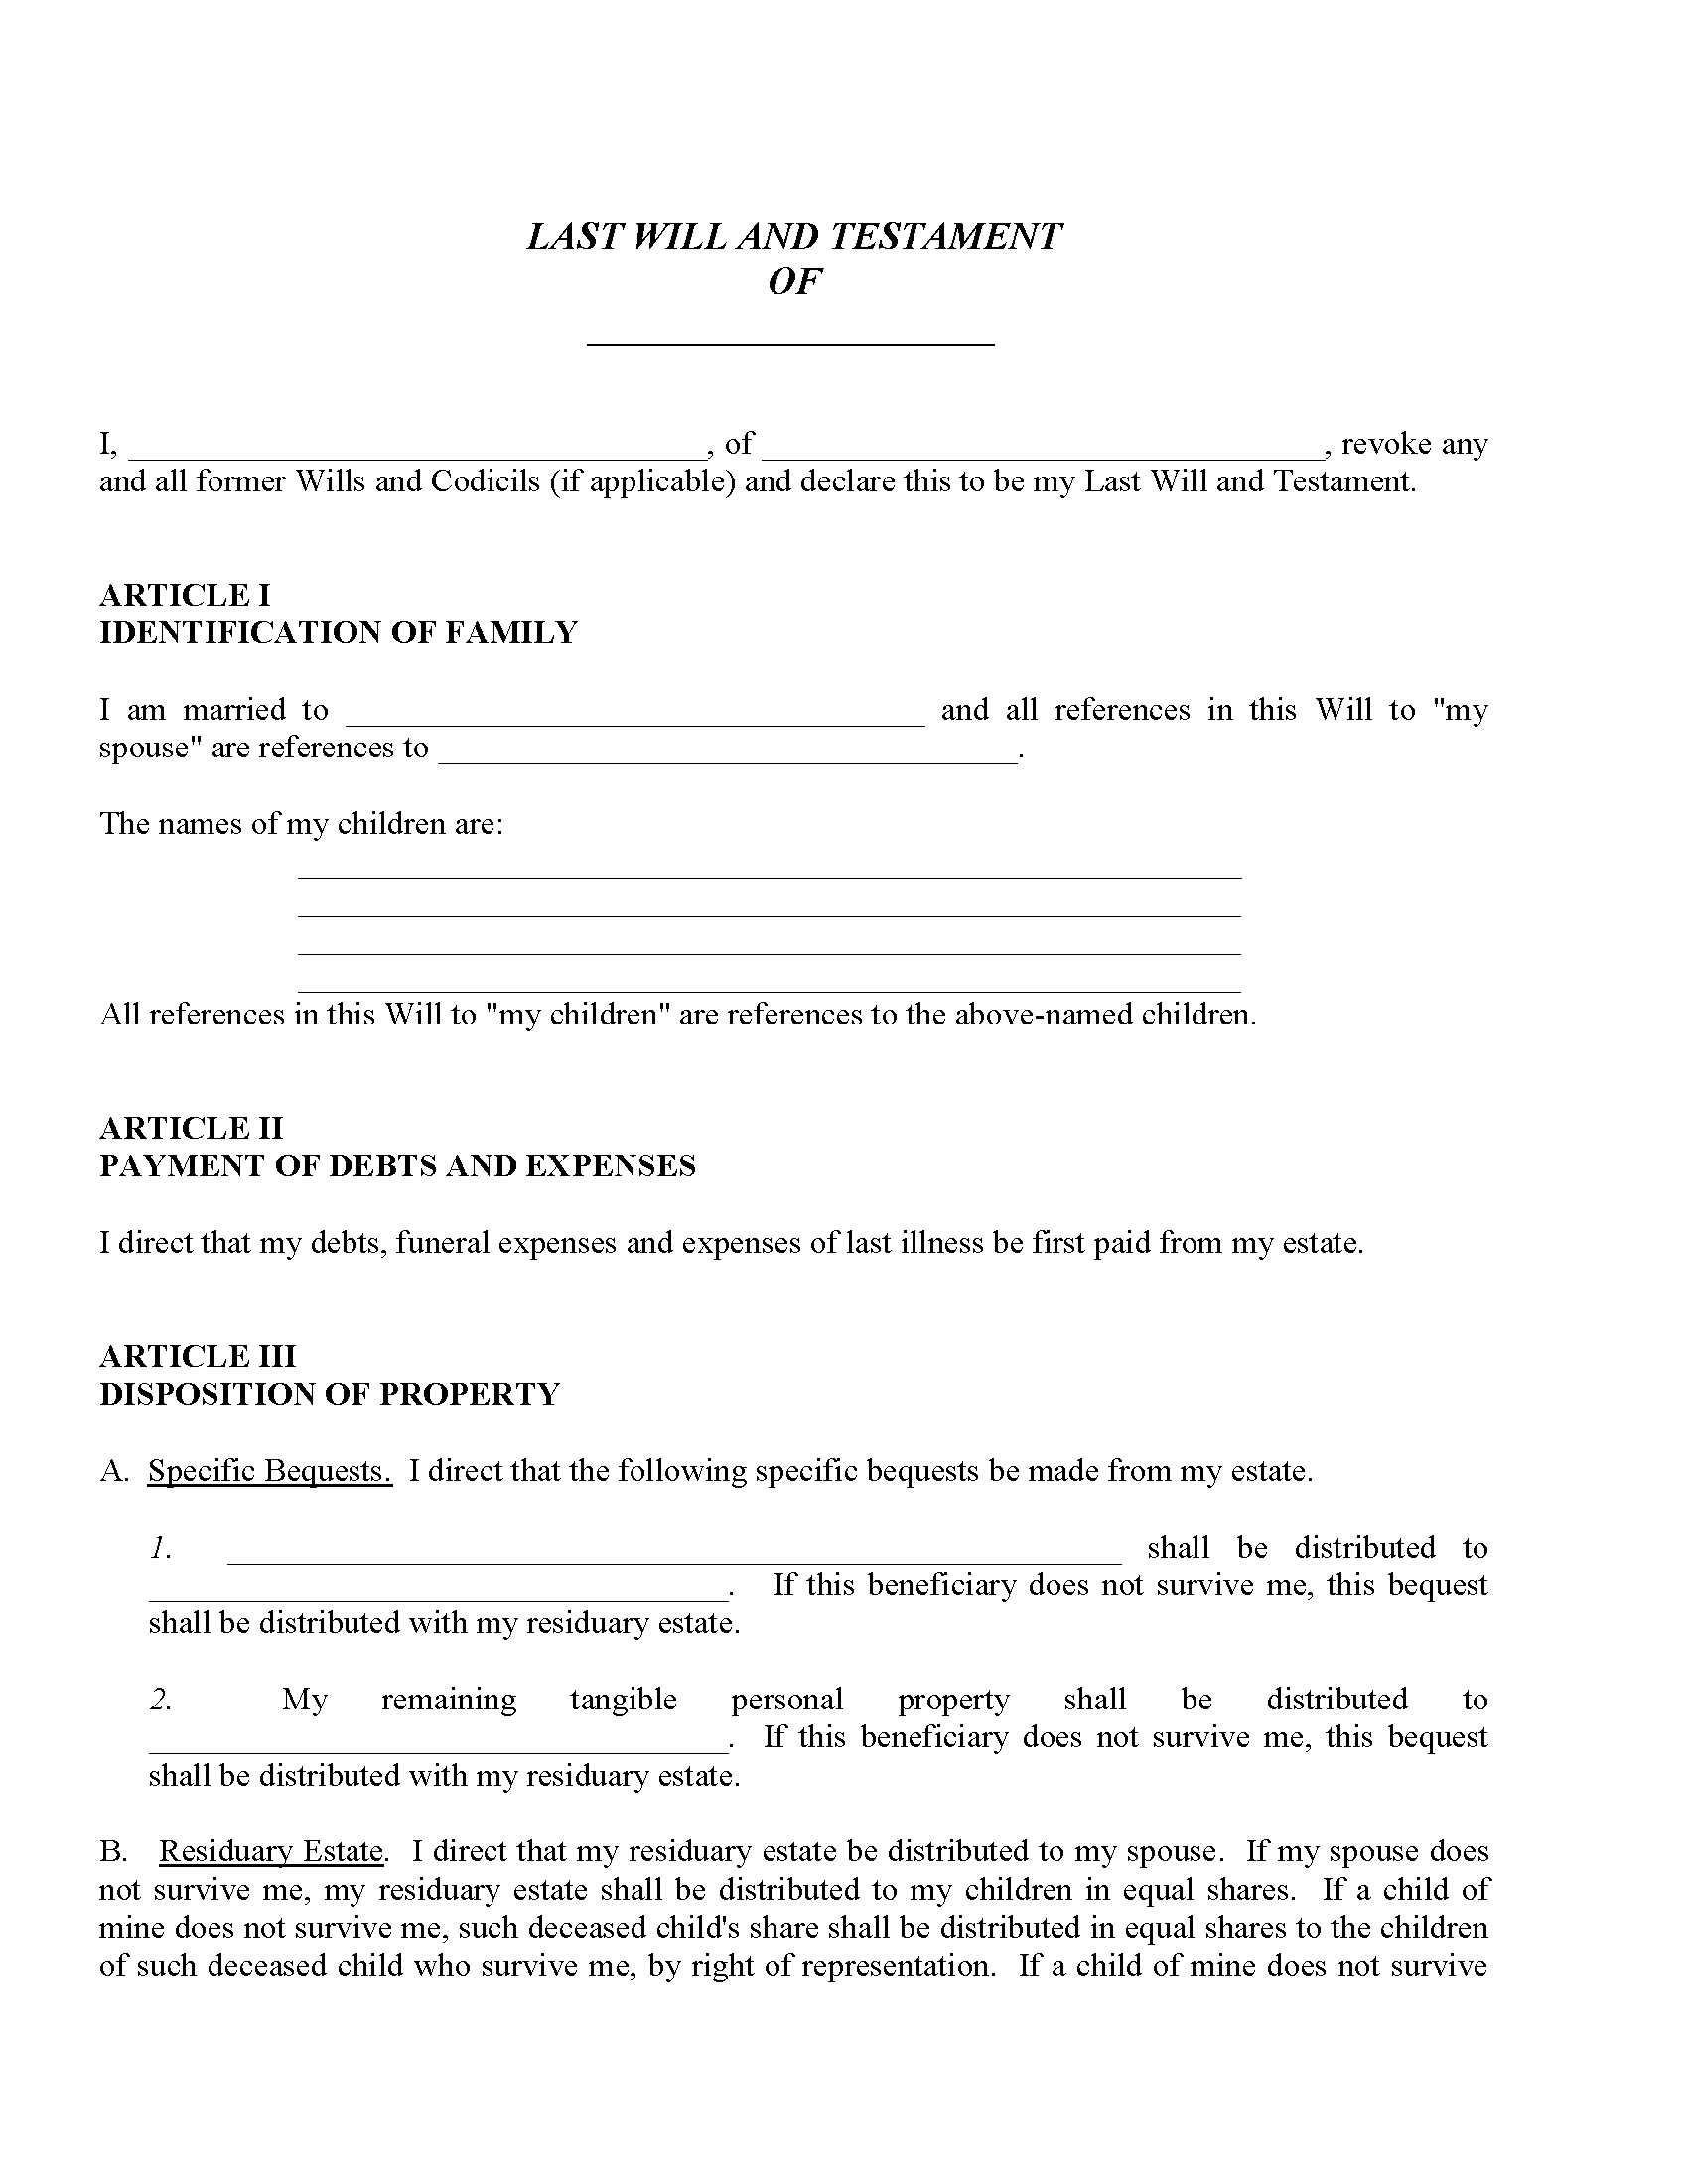 Last Will And Testament Pdf Free Printable Legal Forms